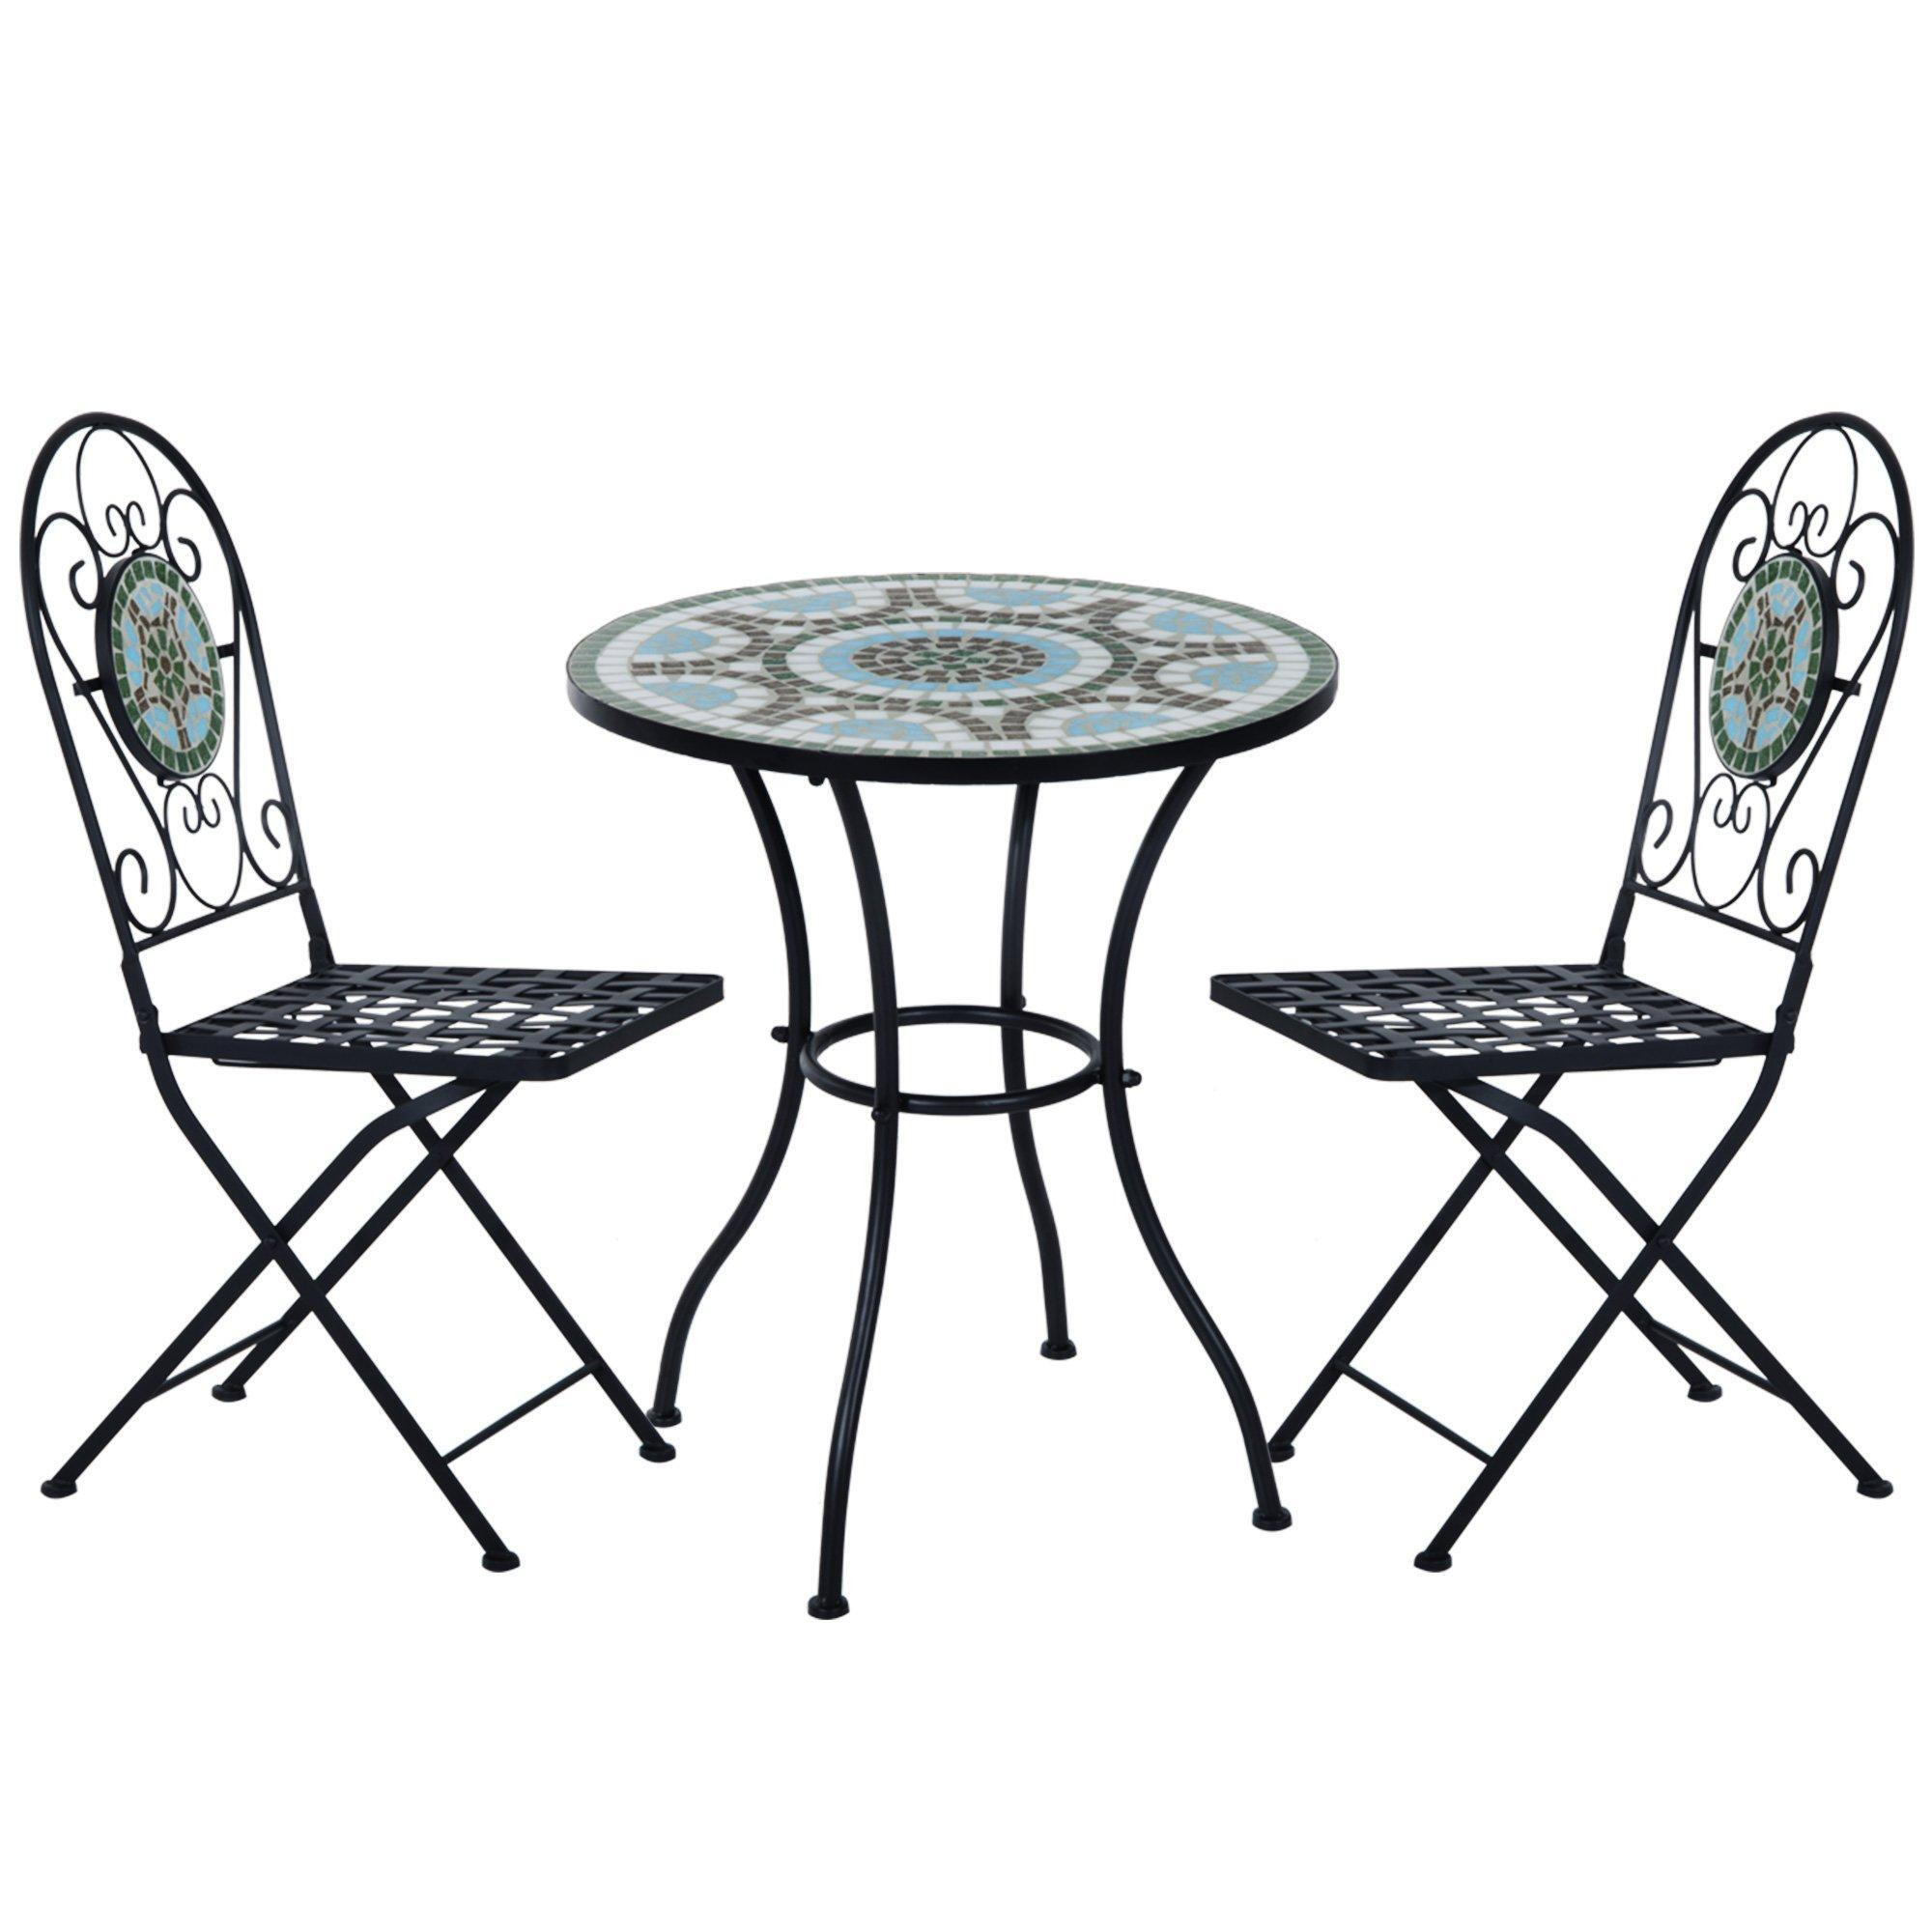 Outdoor 3pc Bistro Set Dining Folding Chairs Patio Furniture - image 1